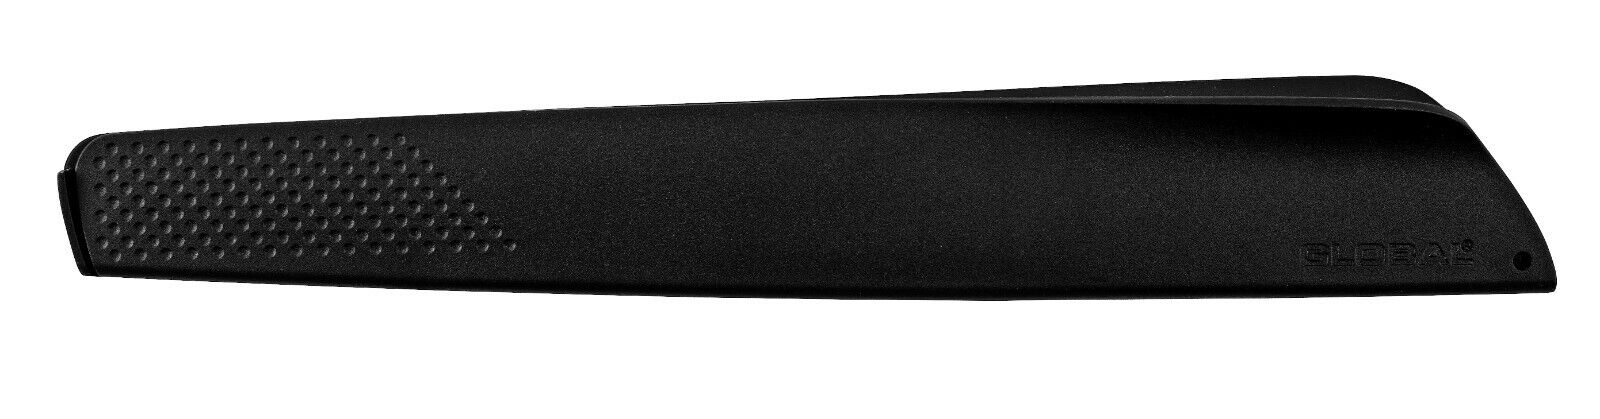 Minneapolis Mall GENUINE GLOBAL UNIVERSAL KNIFE GUARD - 26CM Sales results No. 1 79652 LARGE 1 10